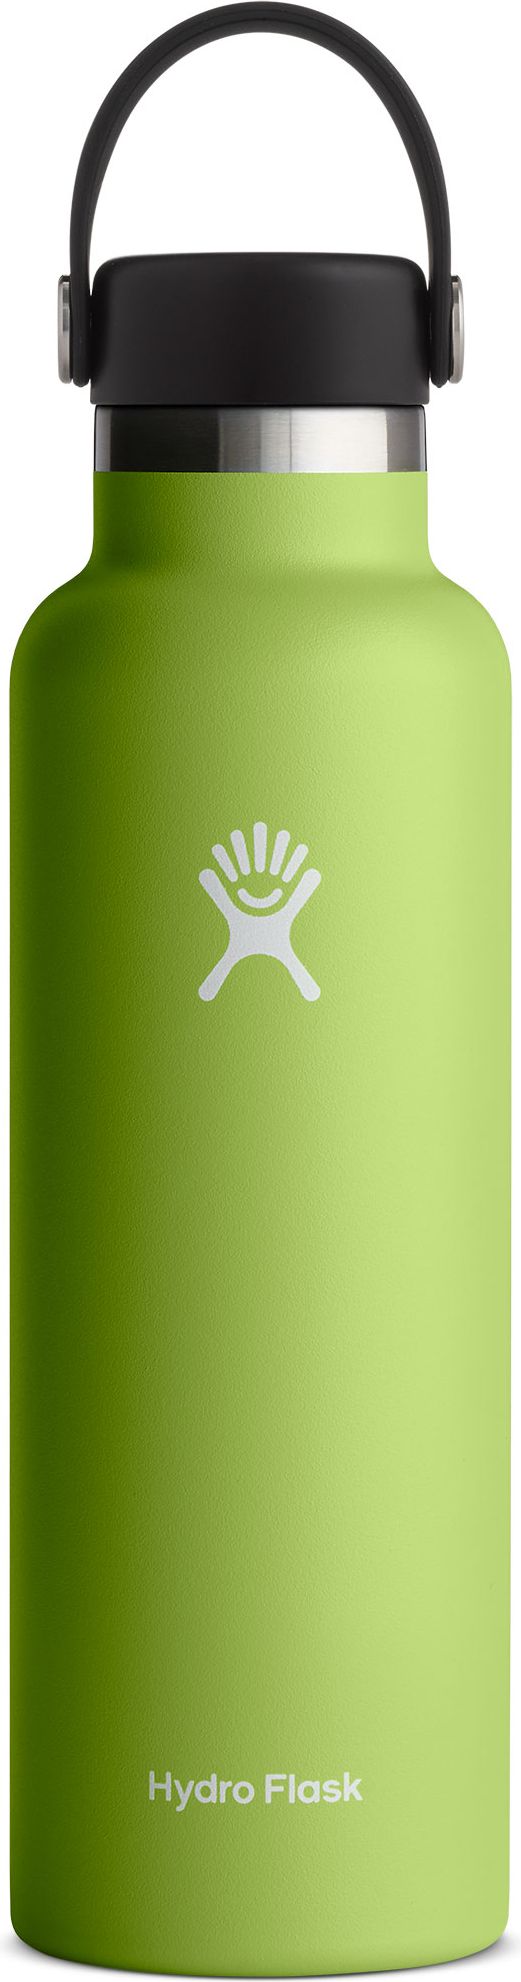 Hydro Flask Accessories 21oz Standard Mouth Seagrass